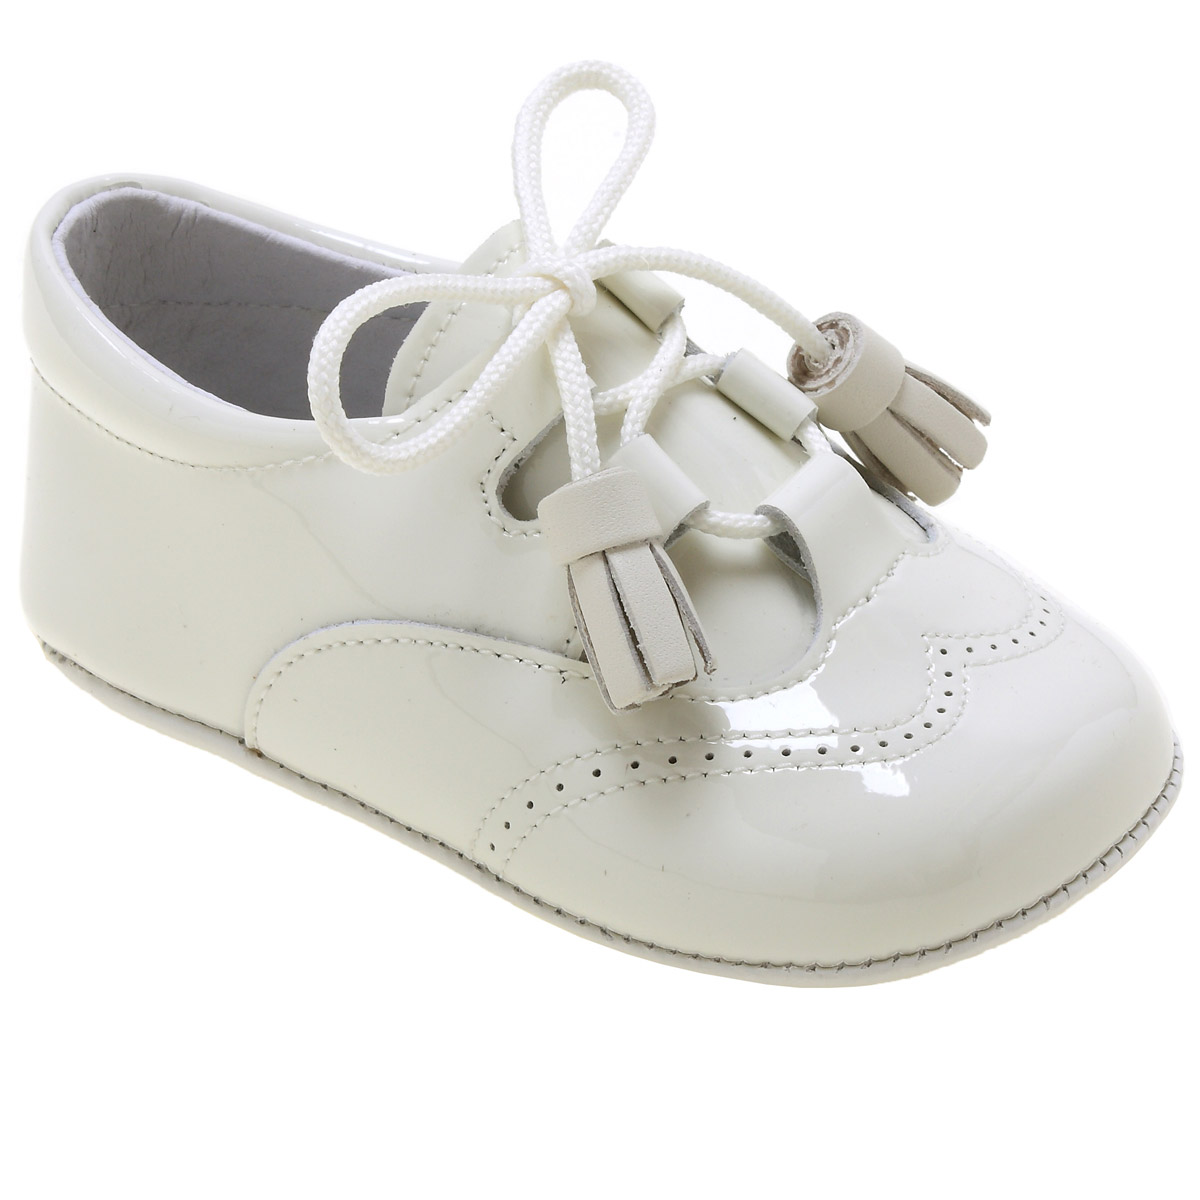 Baby Boys Ivory Patent Pram Shoes With Tassel Laces | Cachet Kids